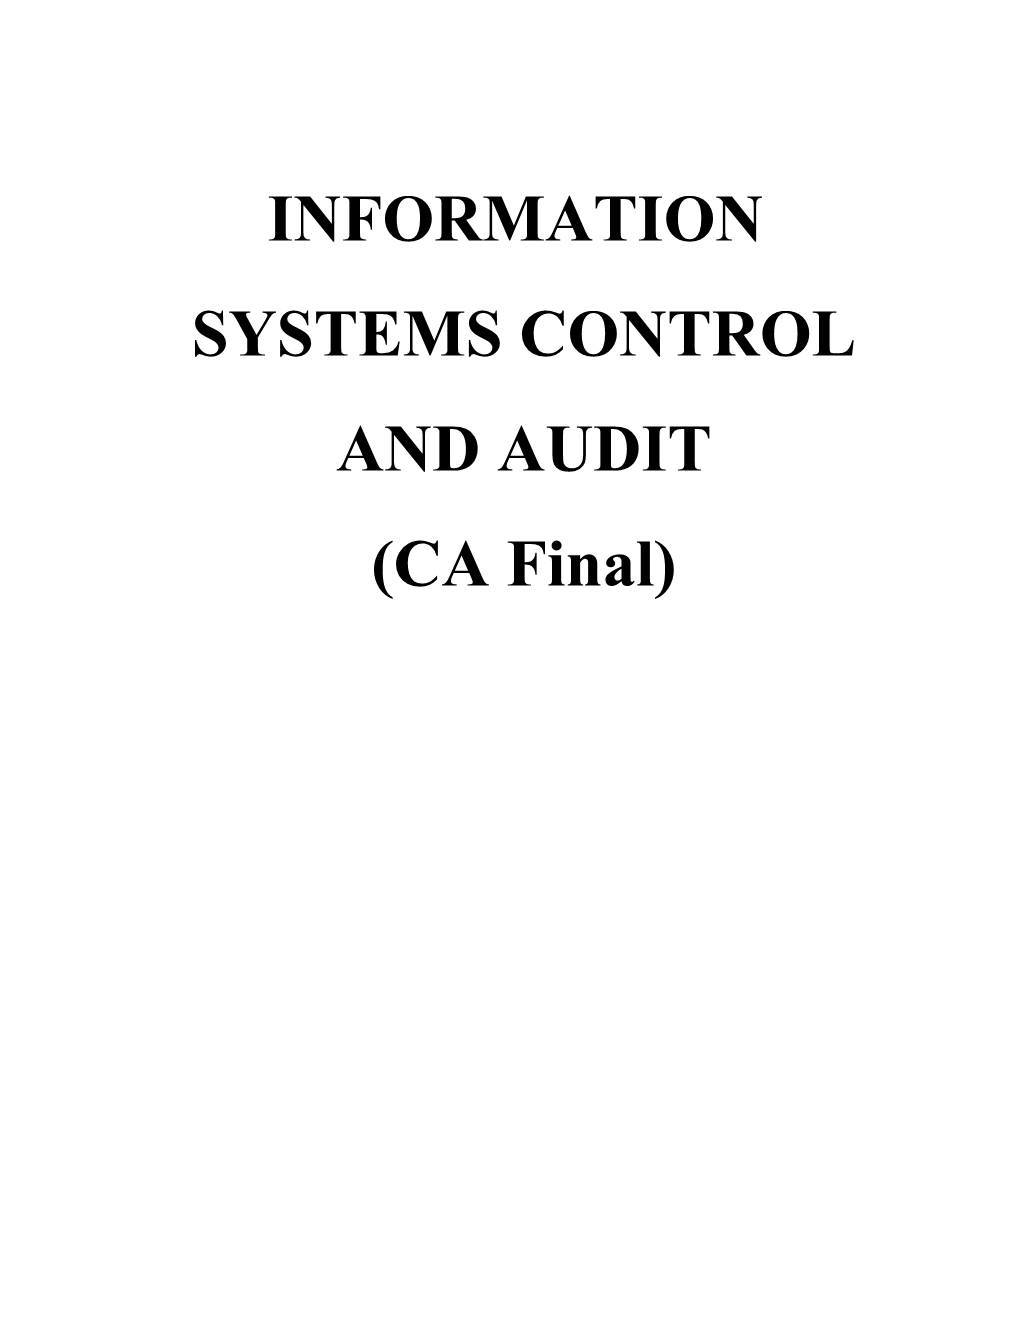 Section (I)Introduction and Defintion of Systems